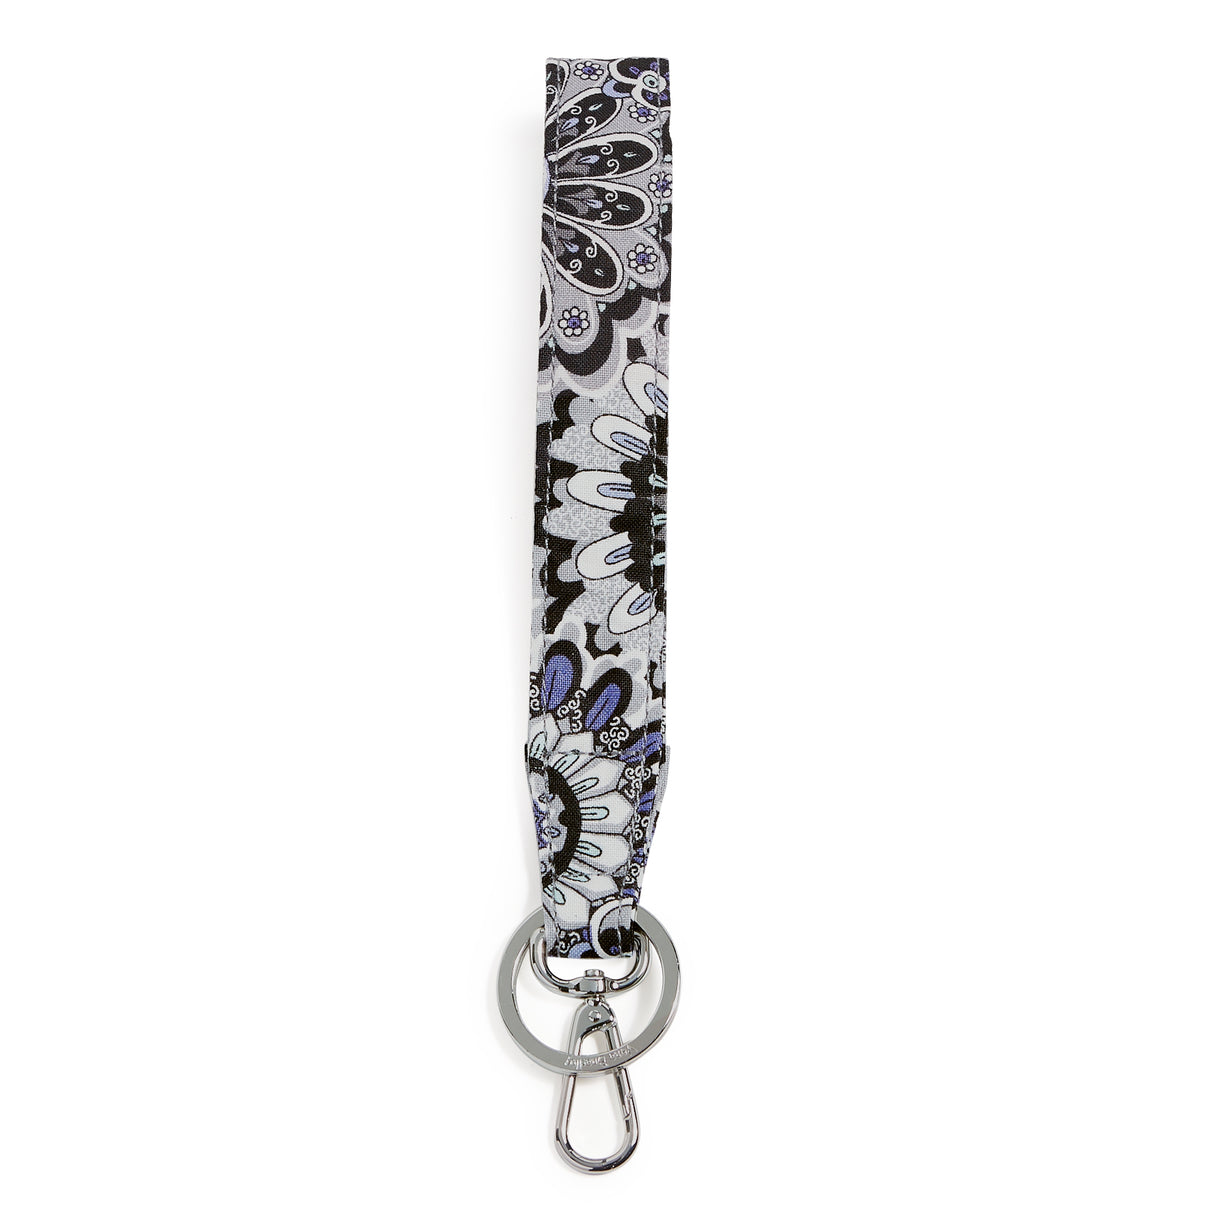 A Wide Loop Keychain in Tranquil Medallion from Vera Bradley.